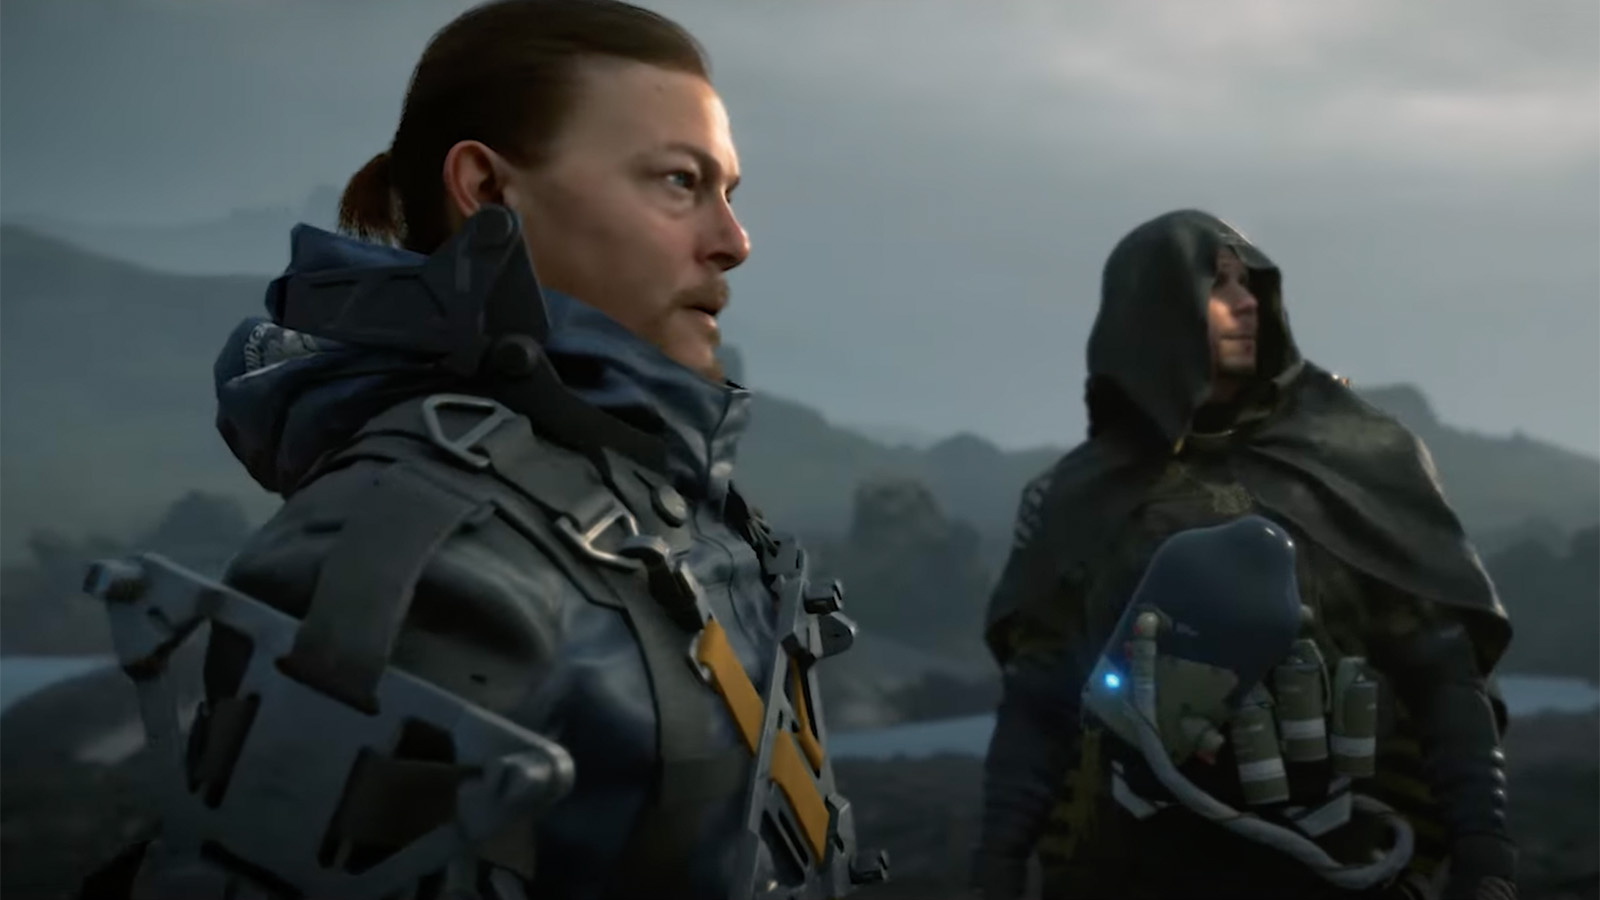 Death Stranding Joins Xbox Game Pass For PC Next Week